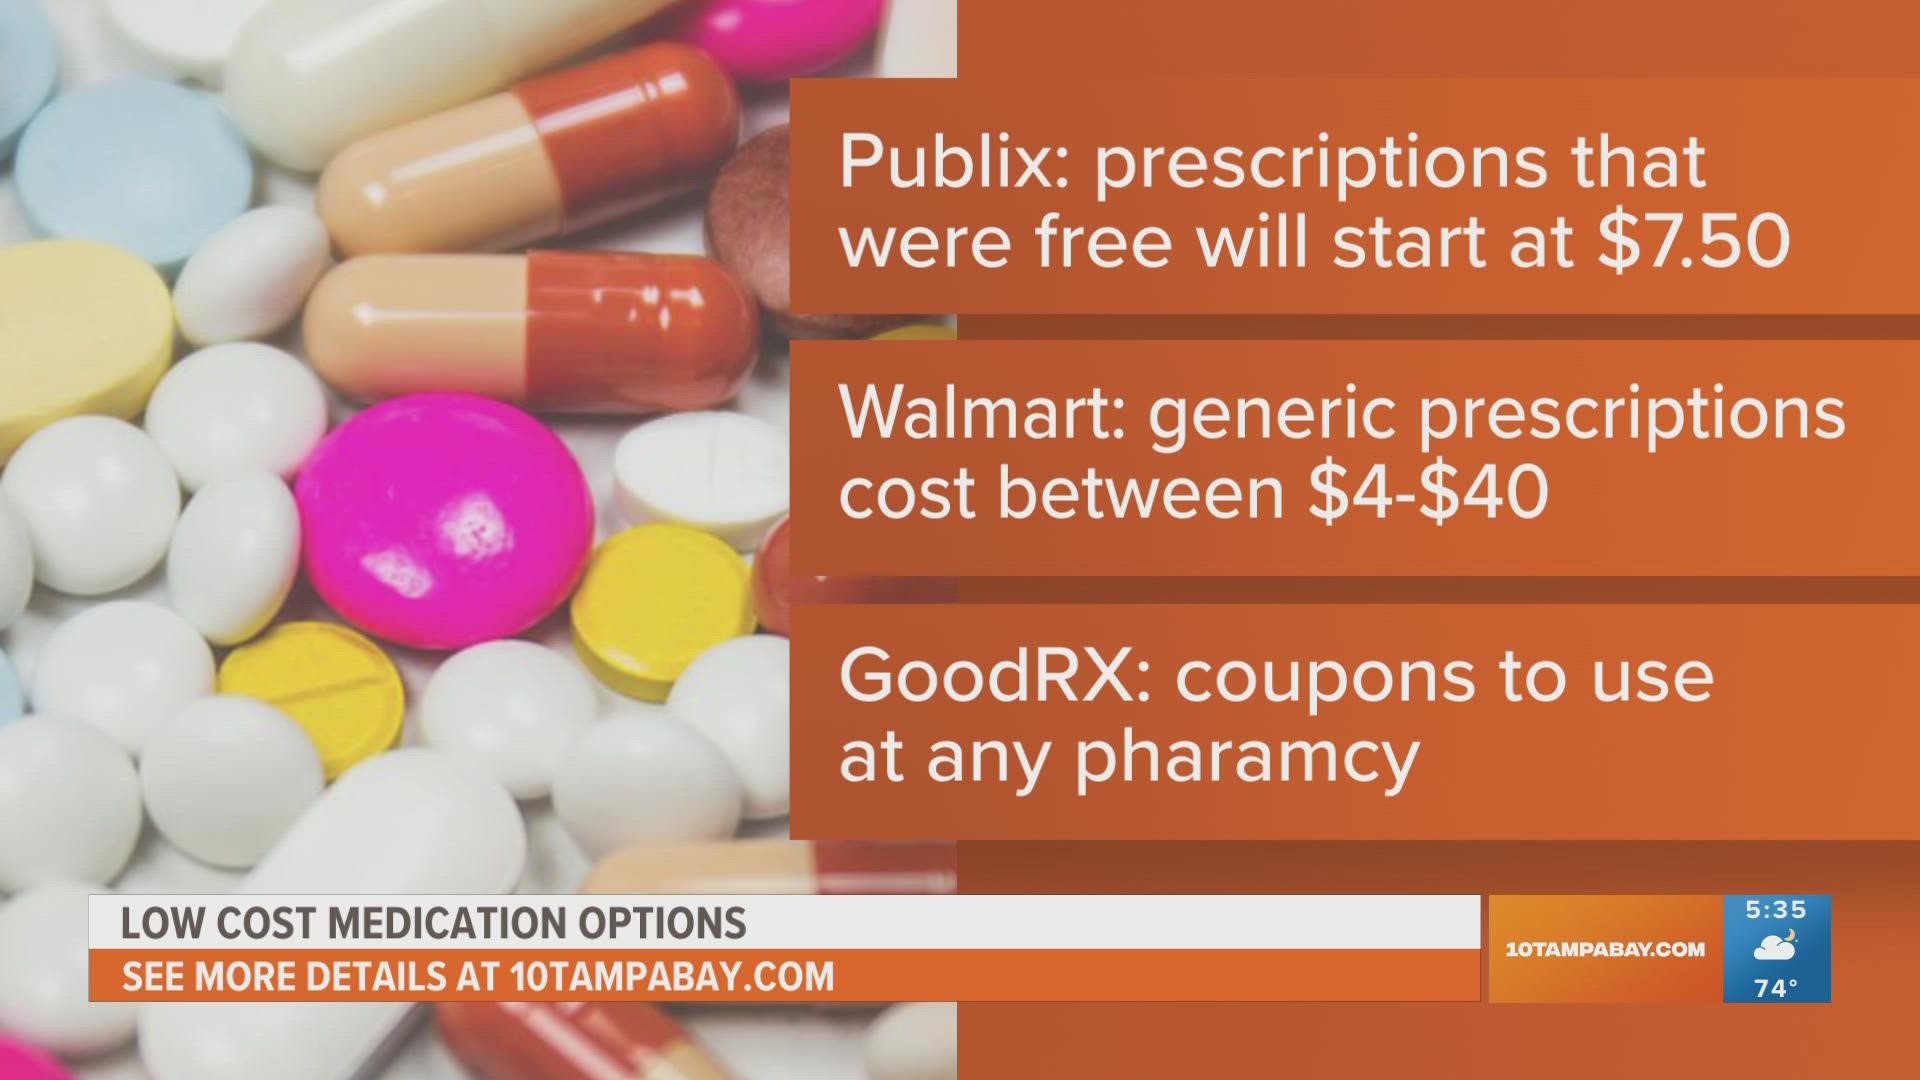 This summer, the grocery store pharmacy will no longer give prescriptions for free, but there are several options to find the same drugs for less.